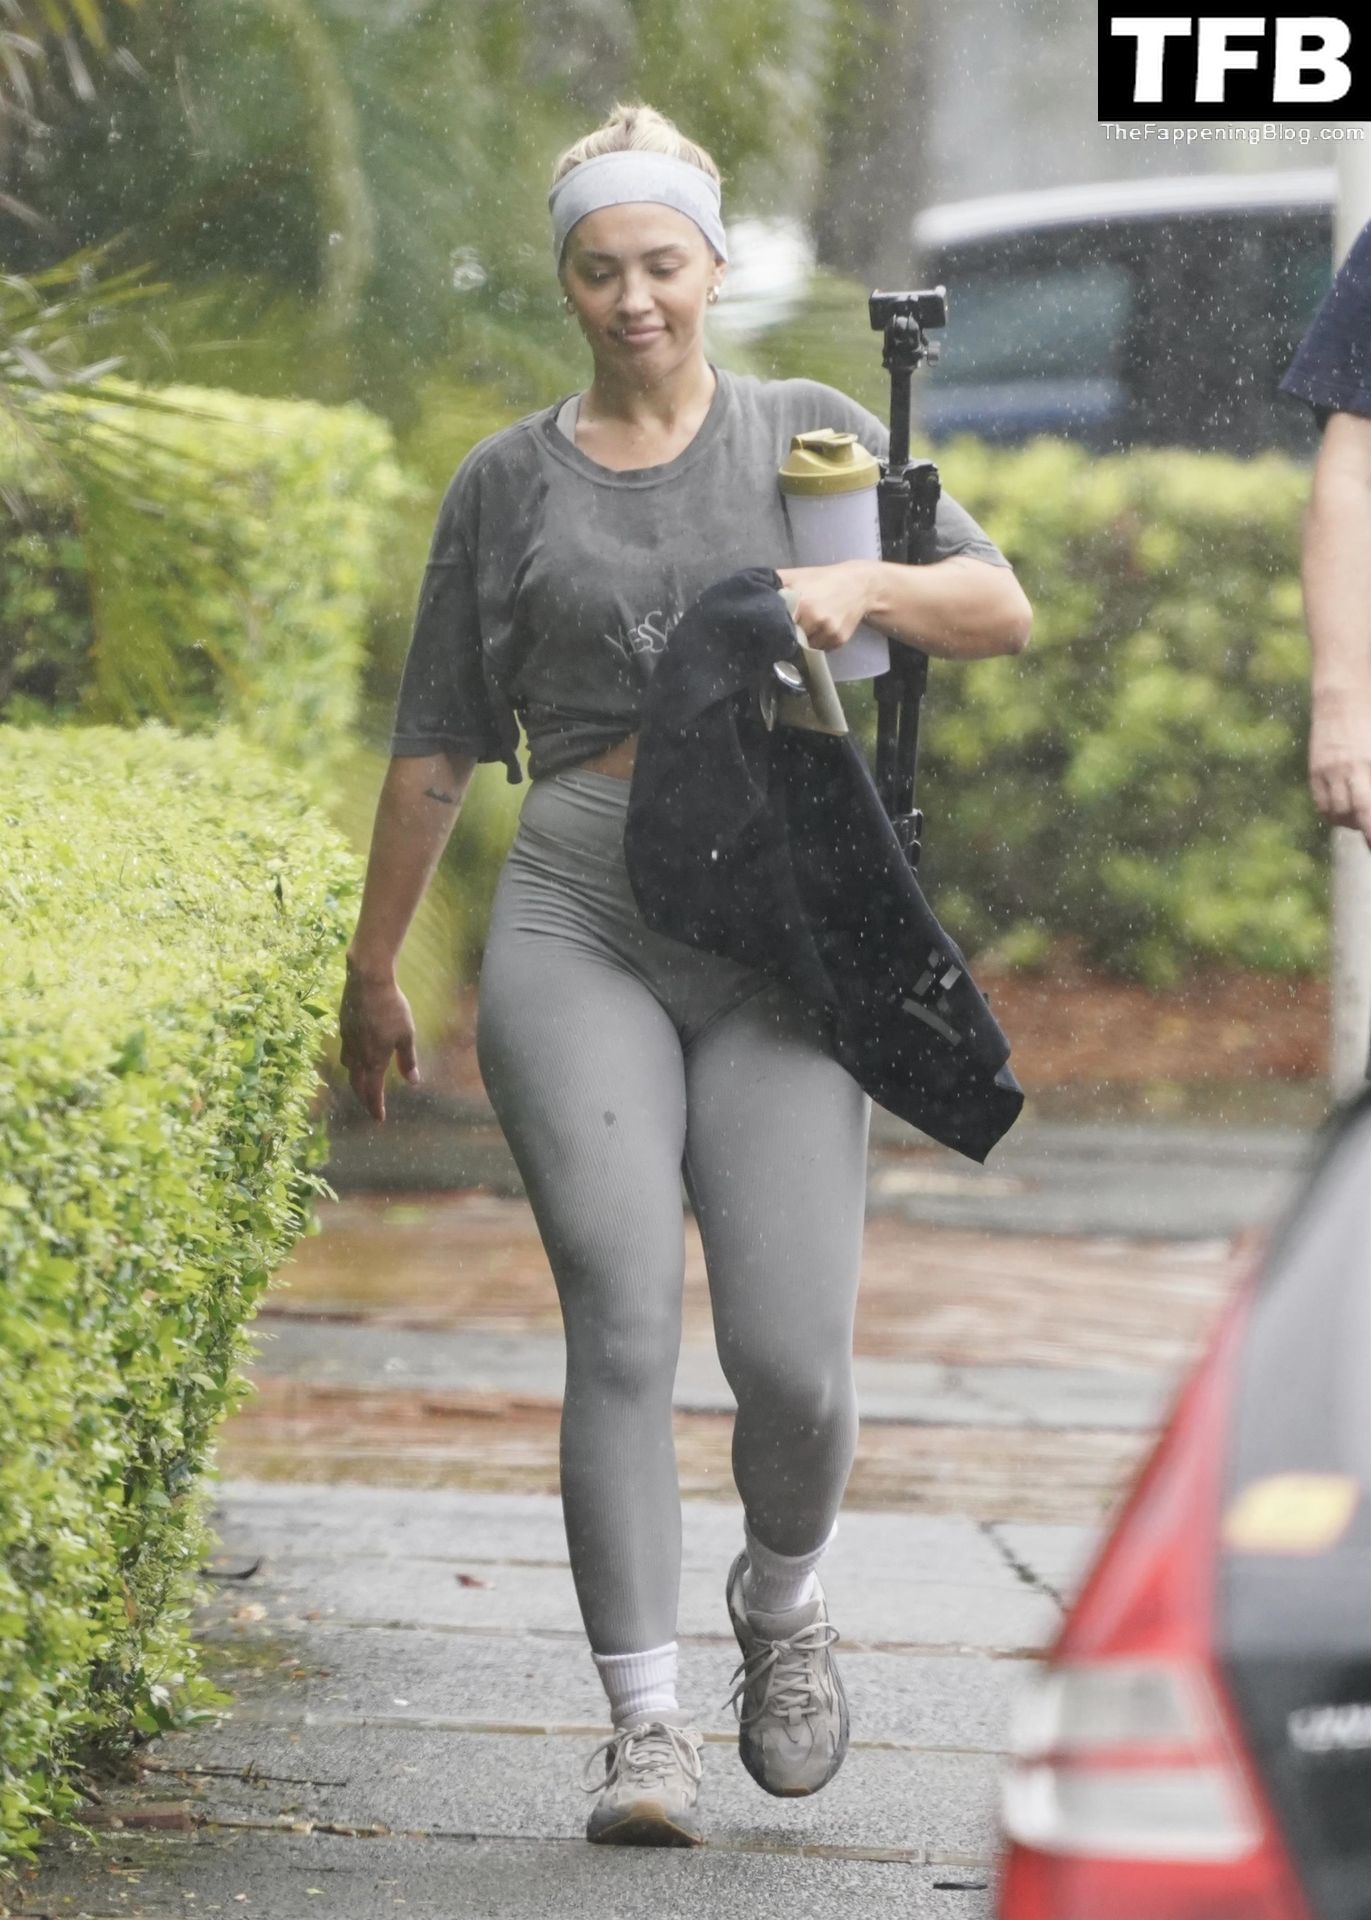 Newly-engaged-Tammy-Hembrow-leaves-the-gym-without-her-engagement-ring-on-during-a-rainy-day-in-Brisbane-The-Fappening-Blog-3.jpg